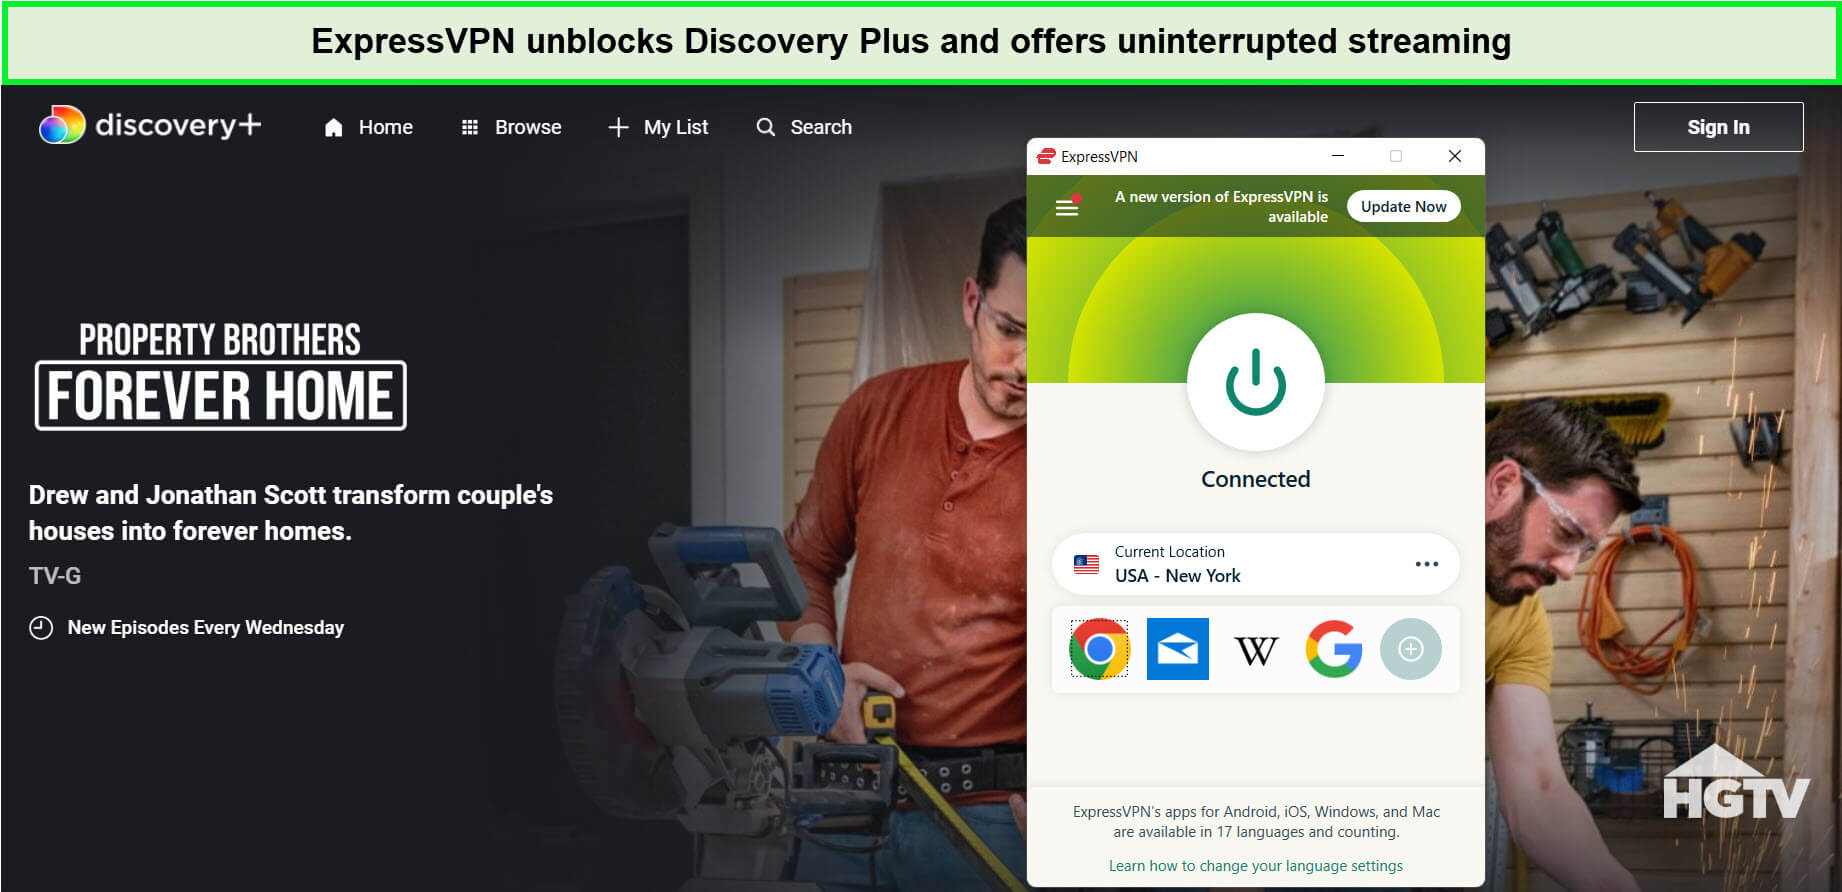 expressvpn-unblocks-property-brothers-forever-home-season-8-on-discovery-plus-in-Singapore